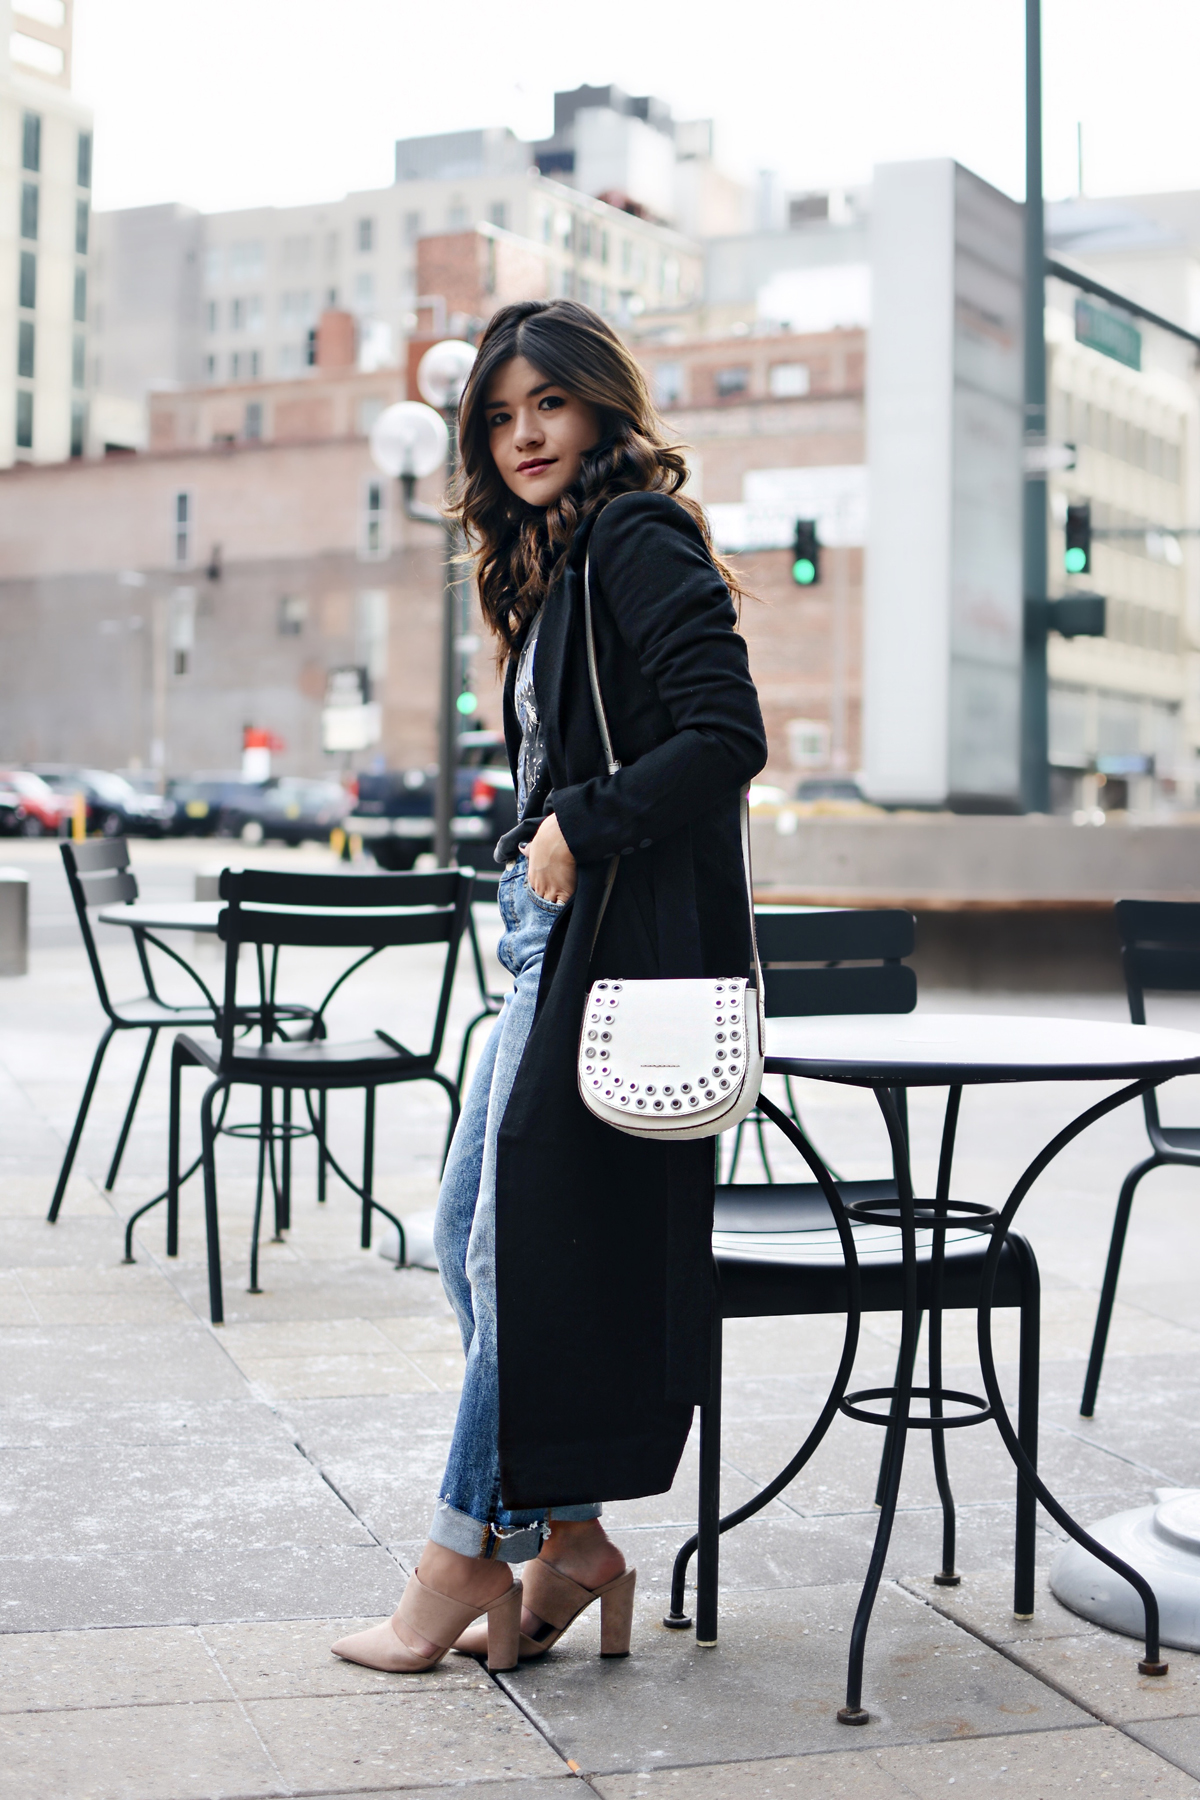 Carolina Hellal of Chic Talk wearing an H&M graphic t-shirt, H&m girlfriend jeans, Frey company white crossbody bag, and NA-KD fashion mules and black coat. - HOW TO STYLE GIRLFRIEND JEANS by popular Denver fashion blogger Chic Talk